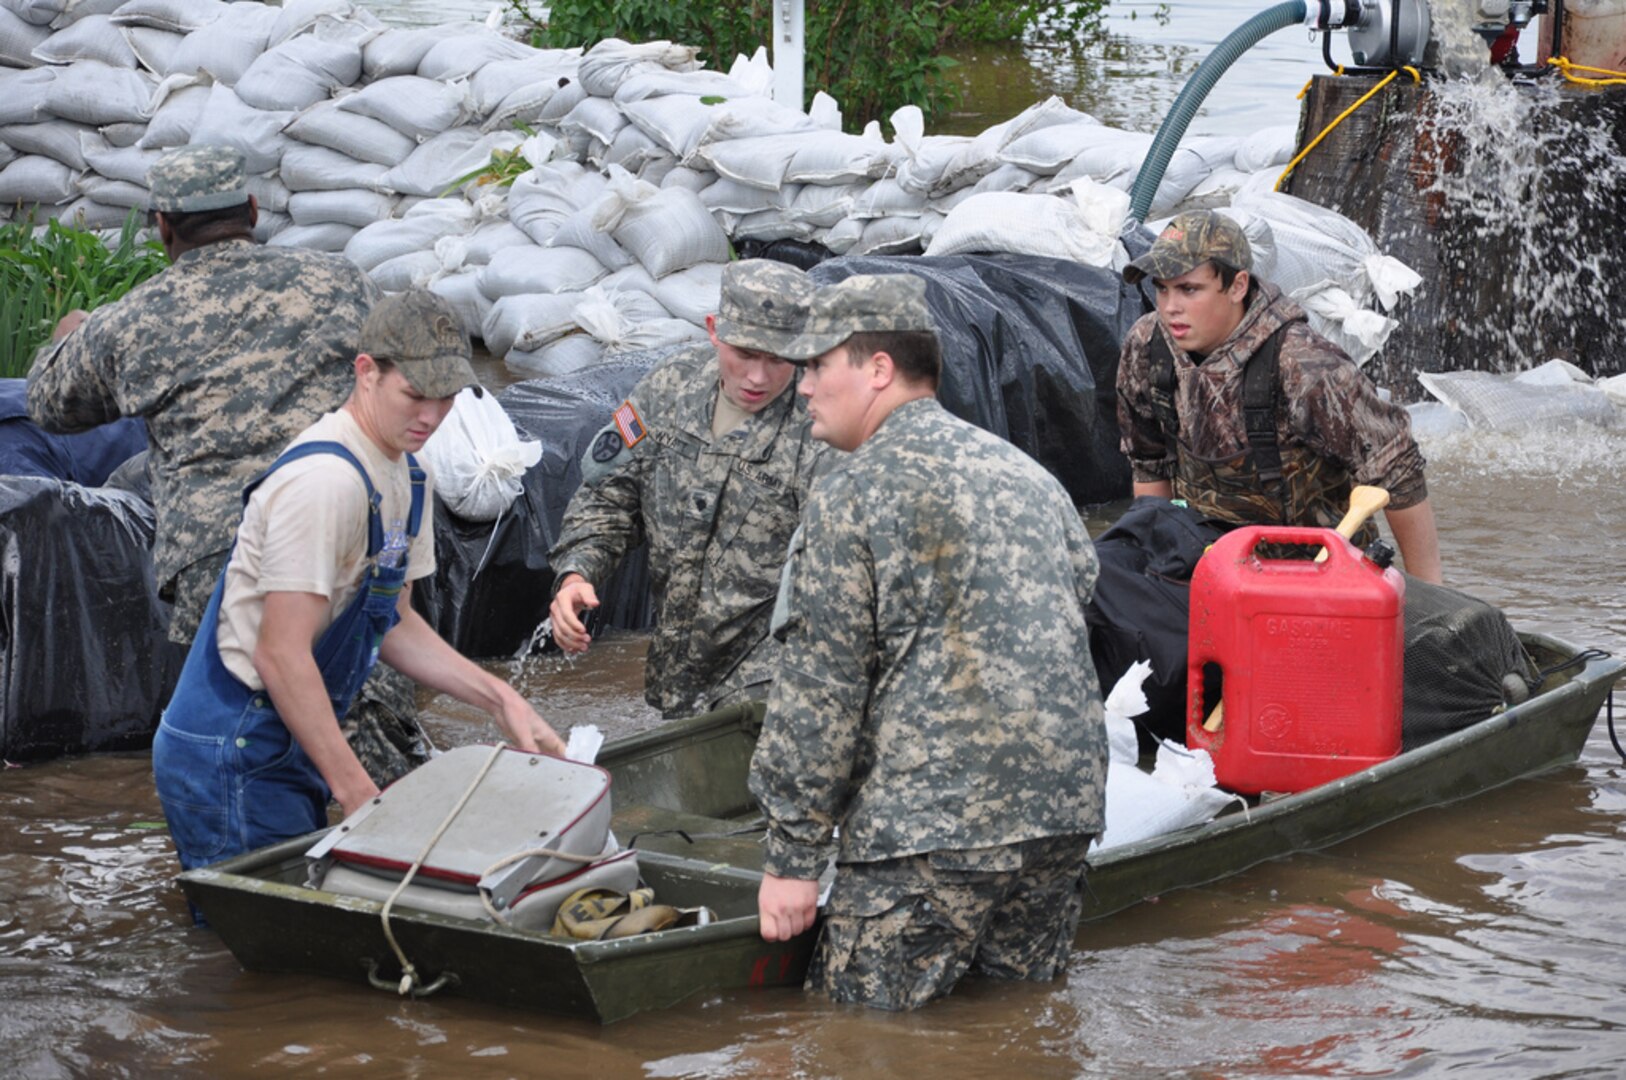 Kentucky National Guard members Army Pfc. David Barrow, Army Spc. Tommy
Wyatt and Army Pvt. Cedric Bransford, 2113th Transportation Company, assist
local residents in flood relief mission in Oscar, Ky., April 27, 2011.
(Photo by Staff Sgt. Michael J. Oliver) (Released)
